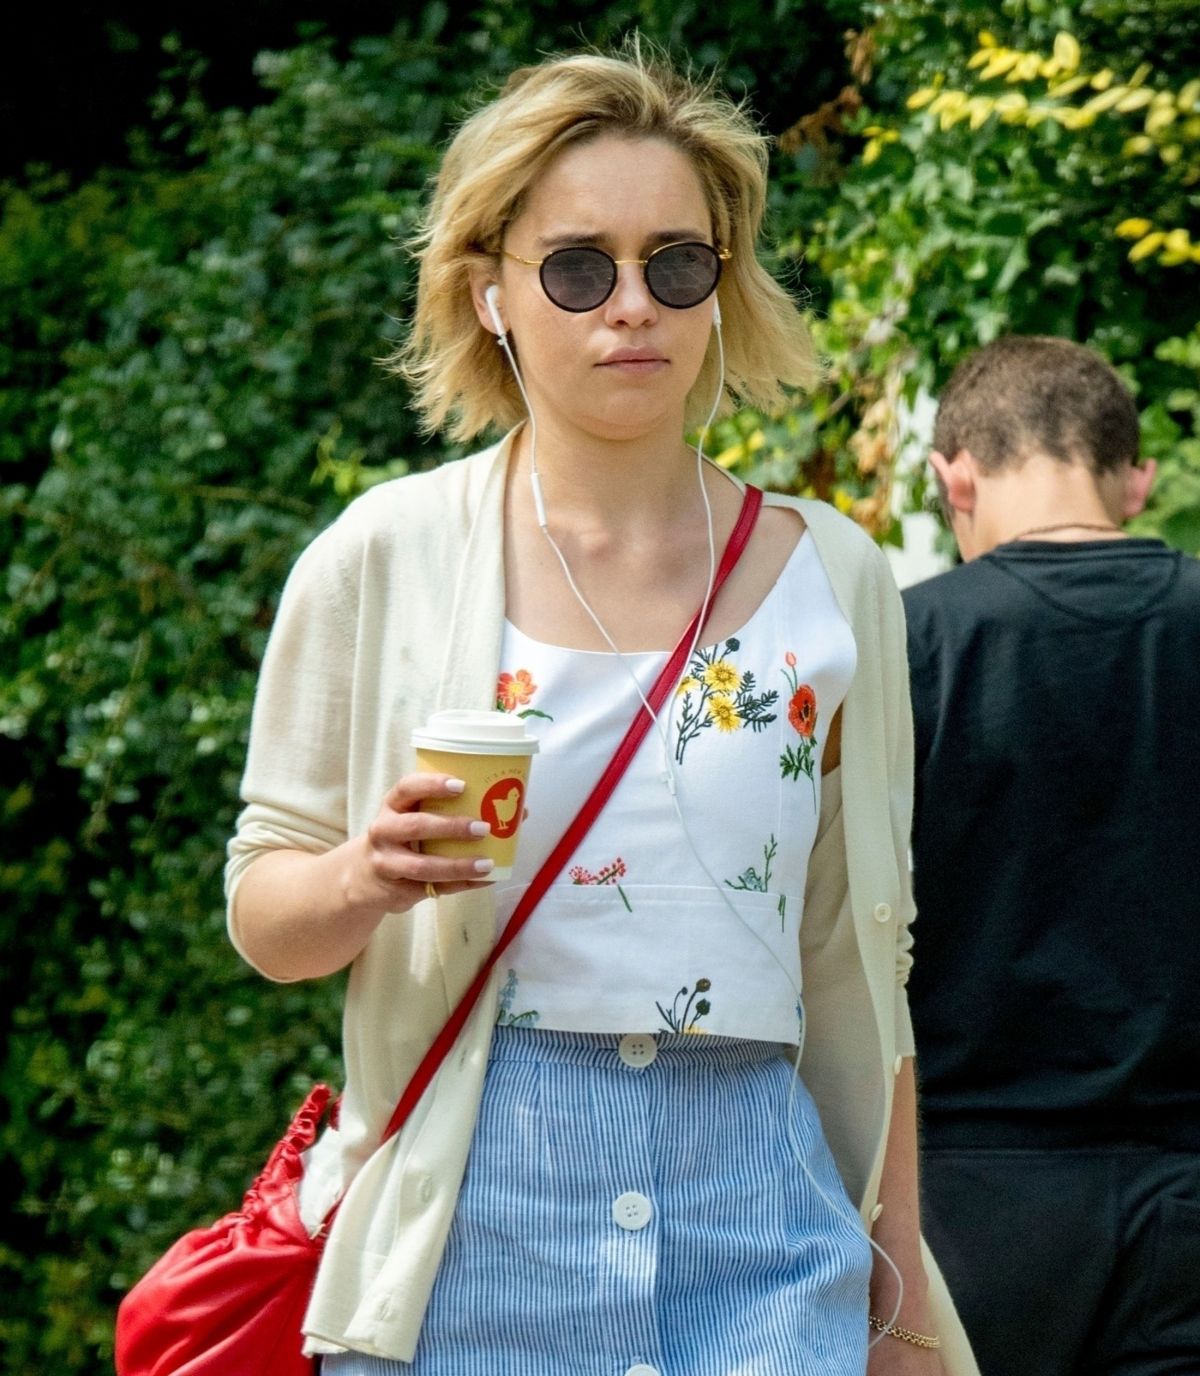 emilia-clarke-out-for-a-coffee-in-london-07-05-2018-11.jpg